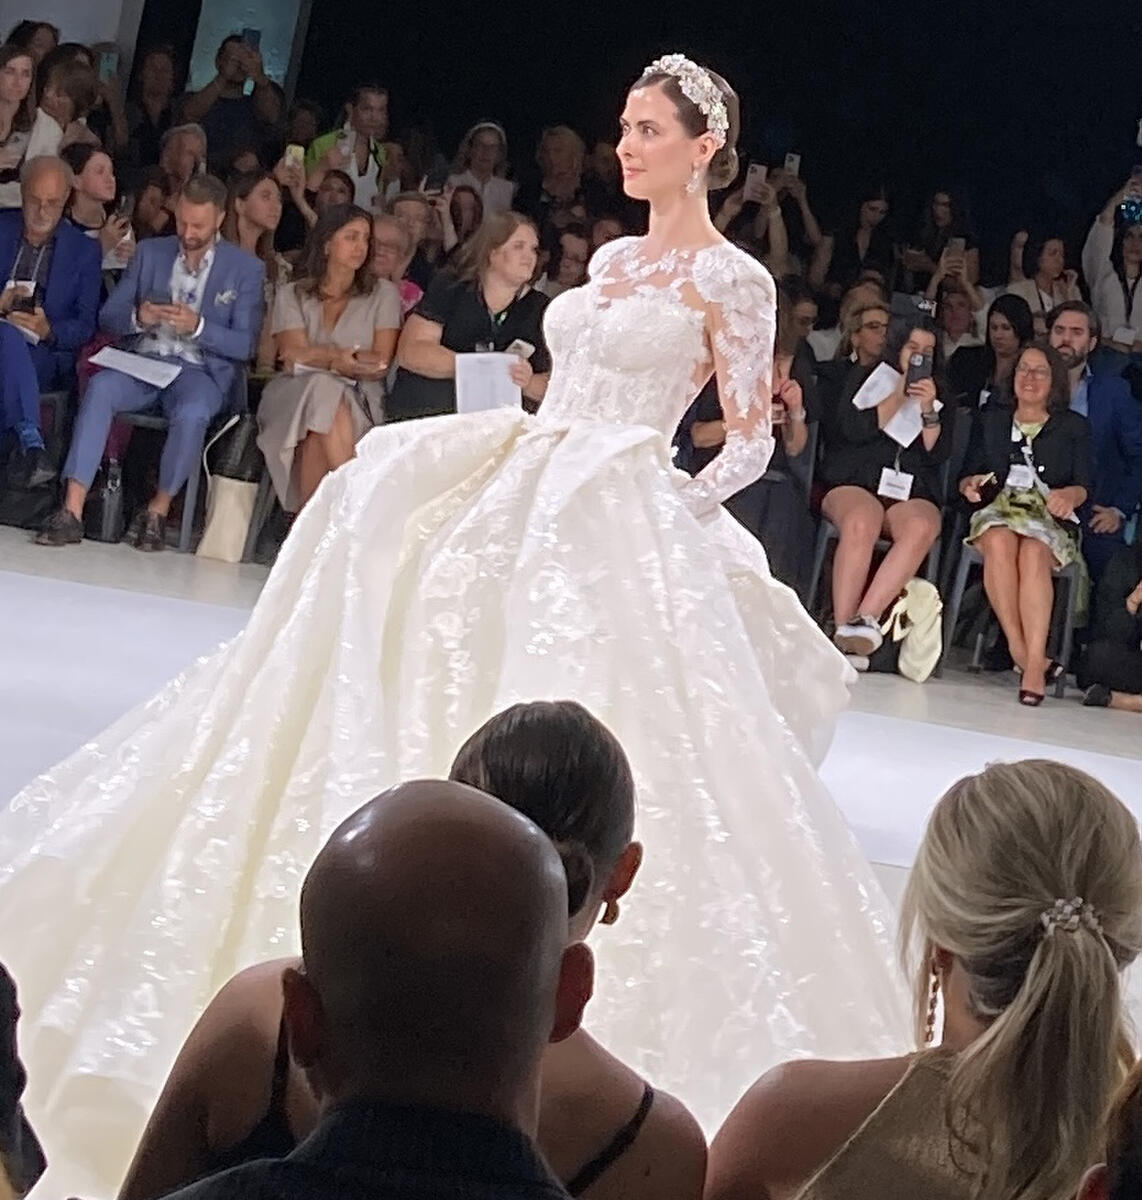 The perfect wedding dress from the main Bridal Fashion Weeks